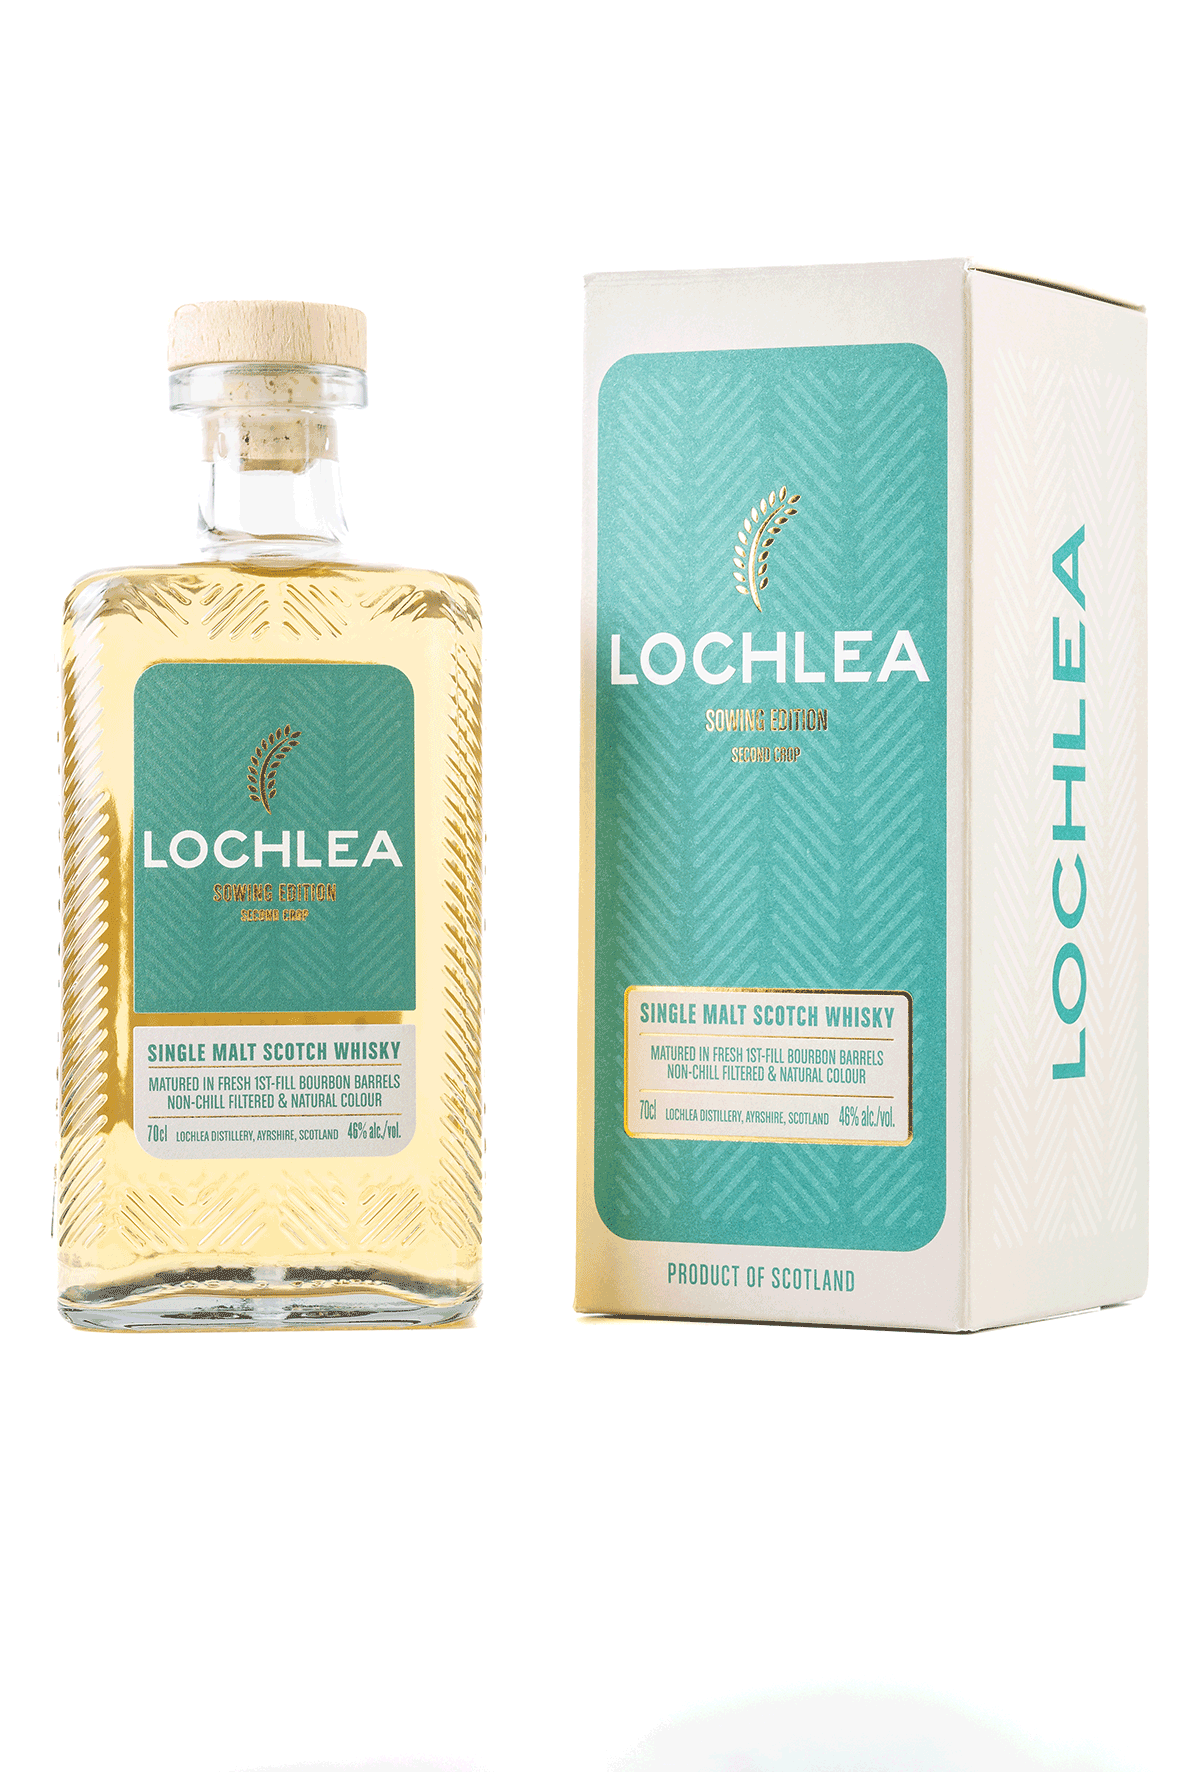 Lochlea, Sowing Edition - Second Crop Whisky